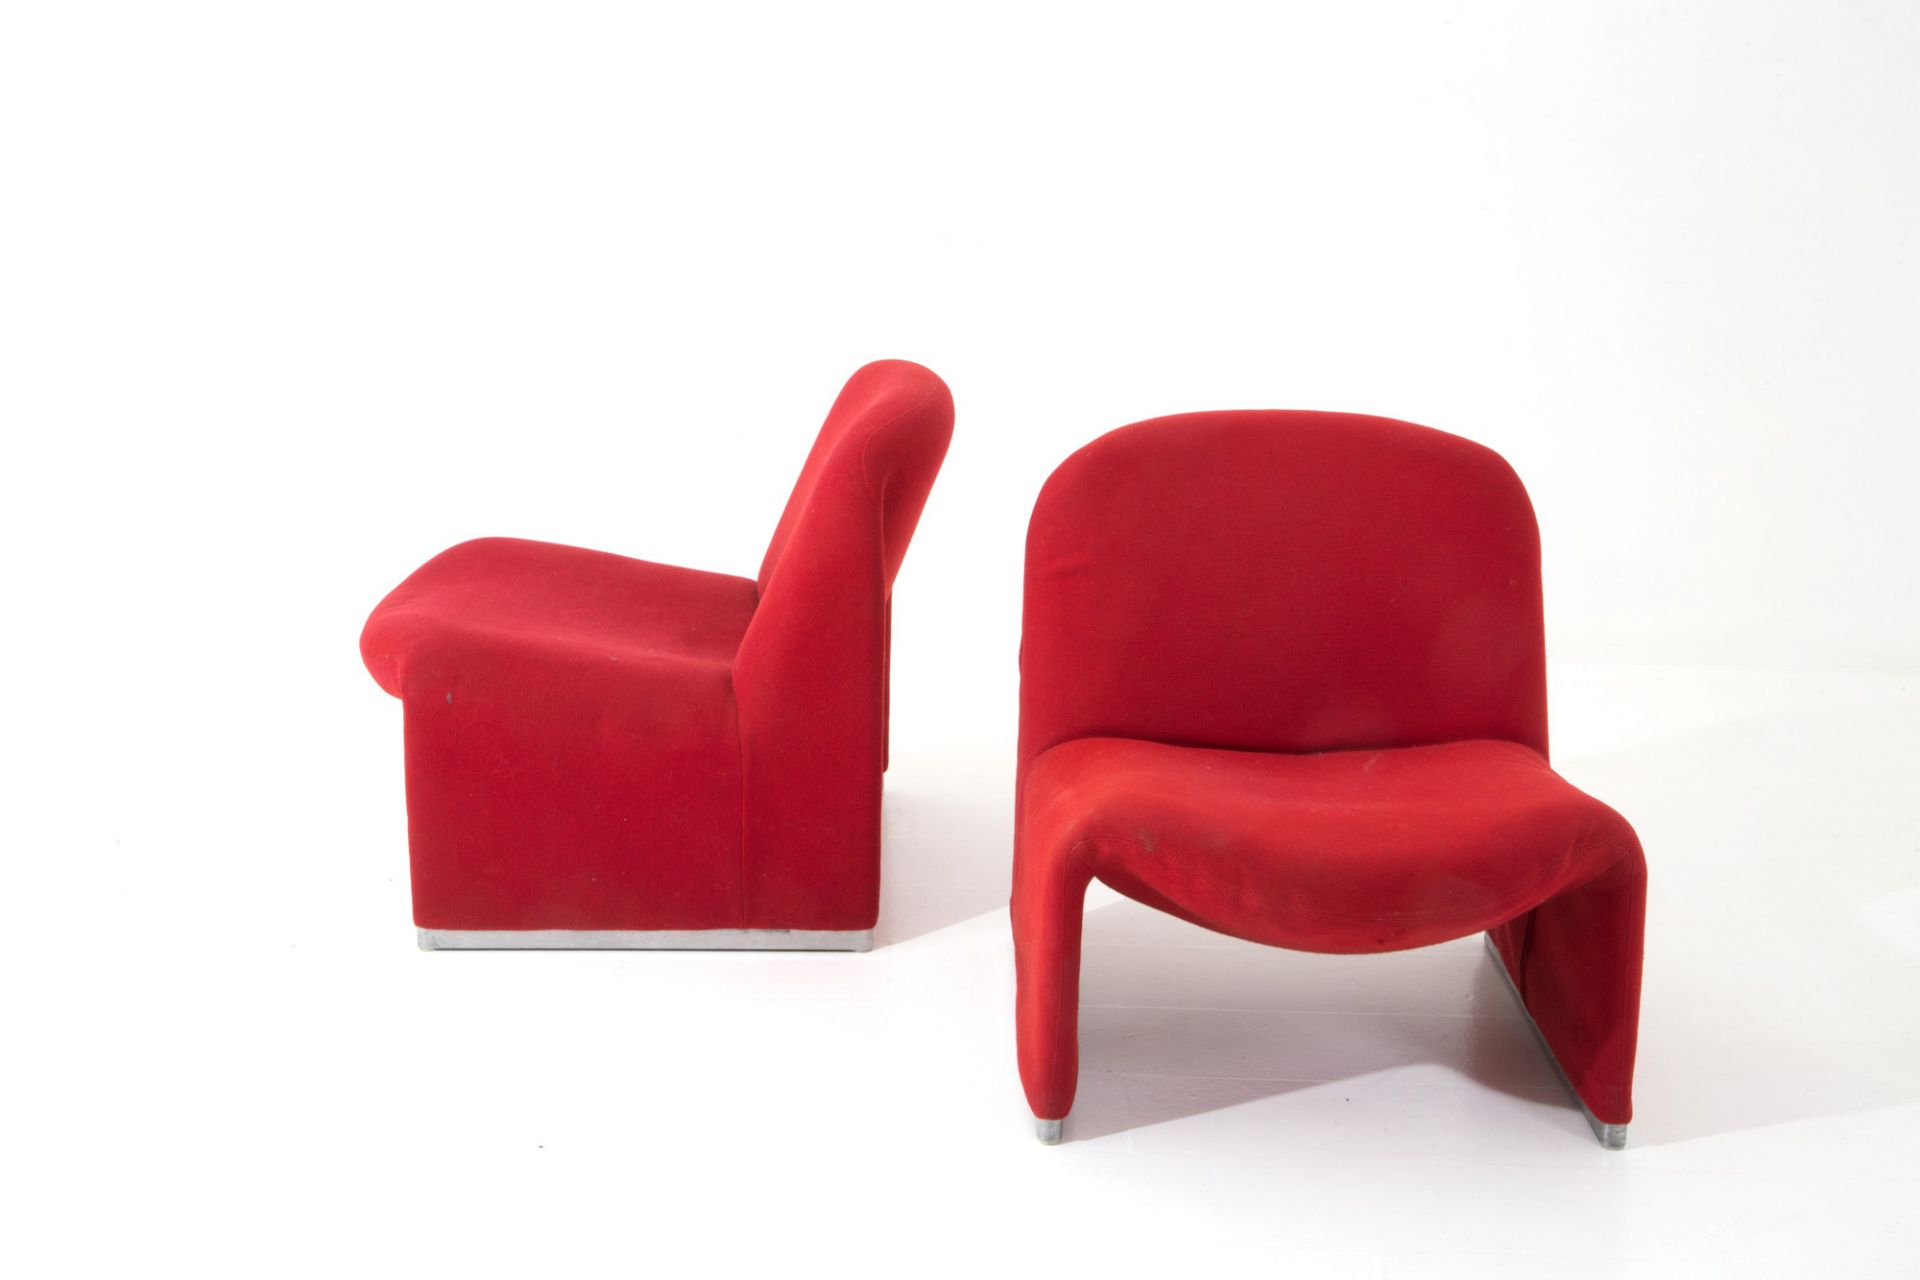 GIANCARLO PIRETTI. Pair of Alky armchairs for ANONIMA CASTELLI - Image 3 of 4